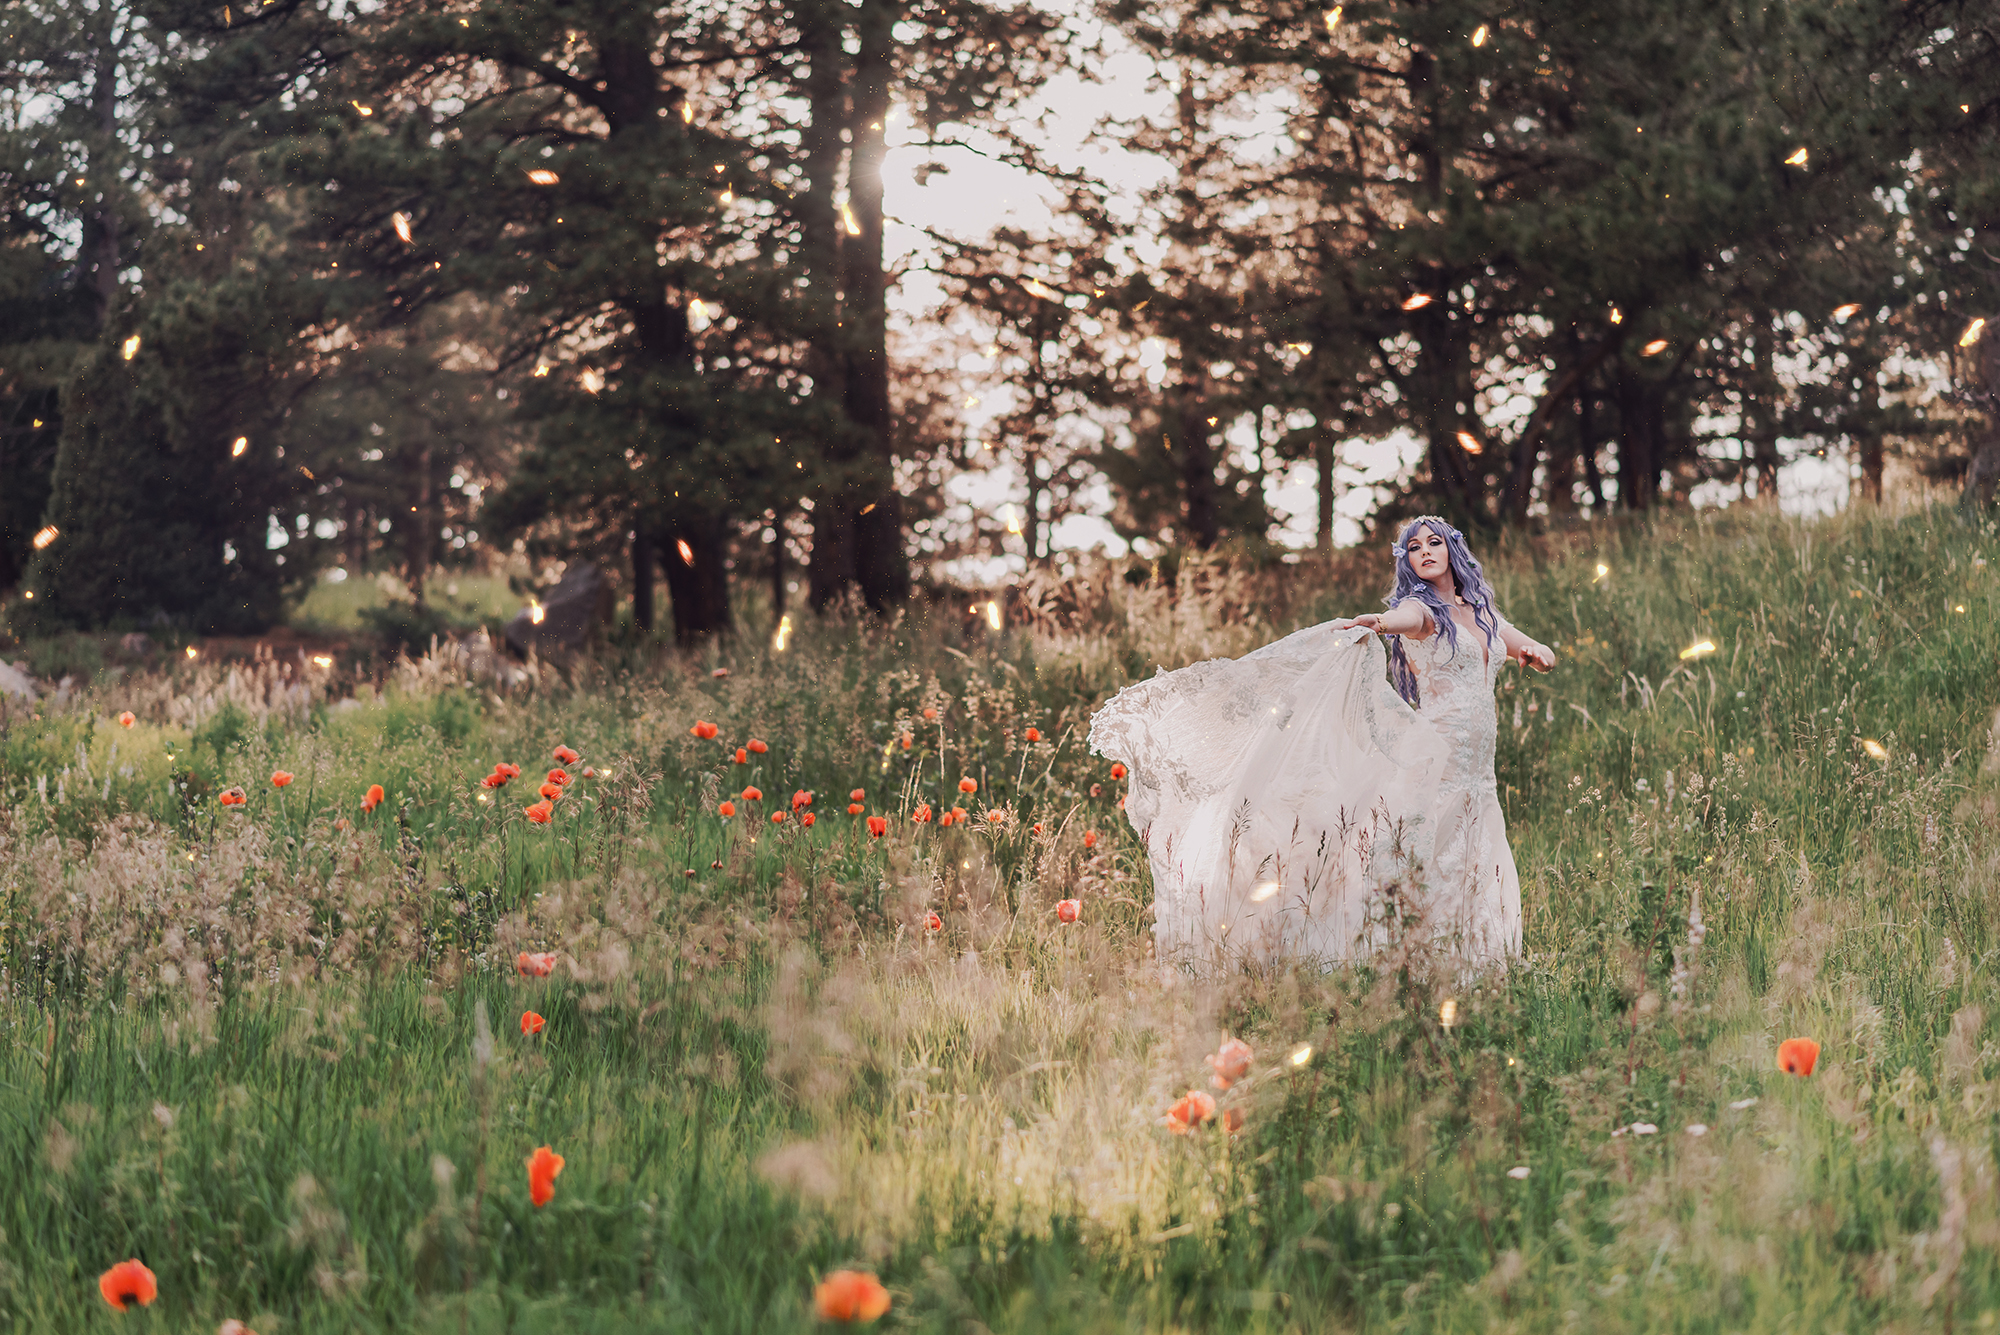 Kendra Colleen Photography takes a fantasy photo of a woman with purple hair spinning in through the woods in a field of wildflowers in Boulder Colorado